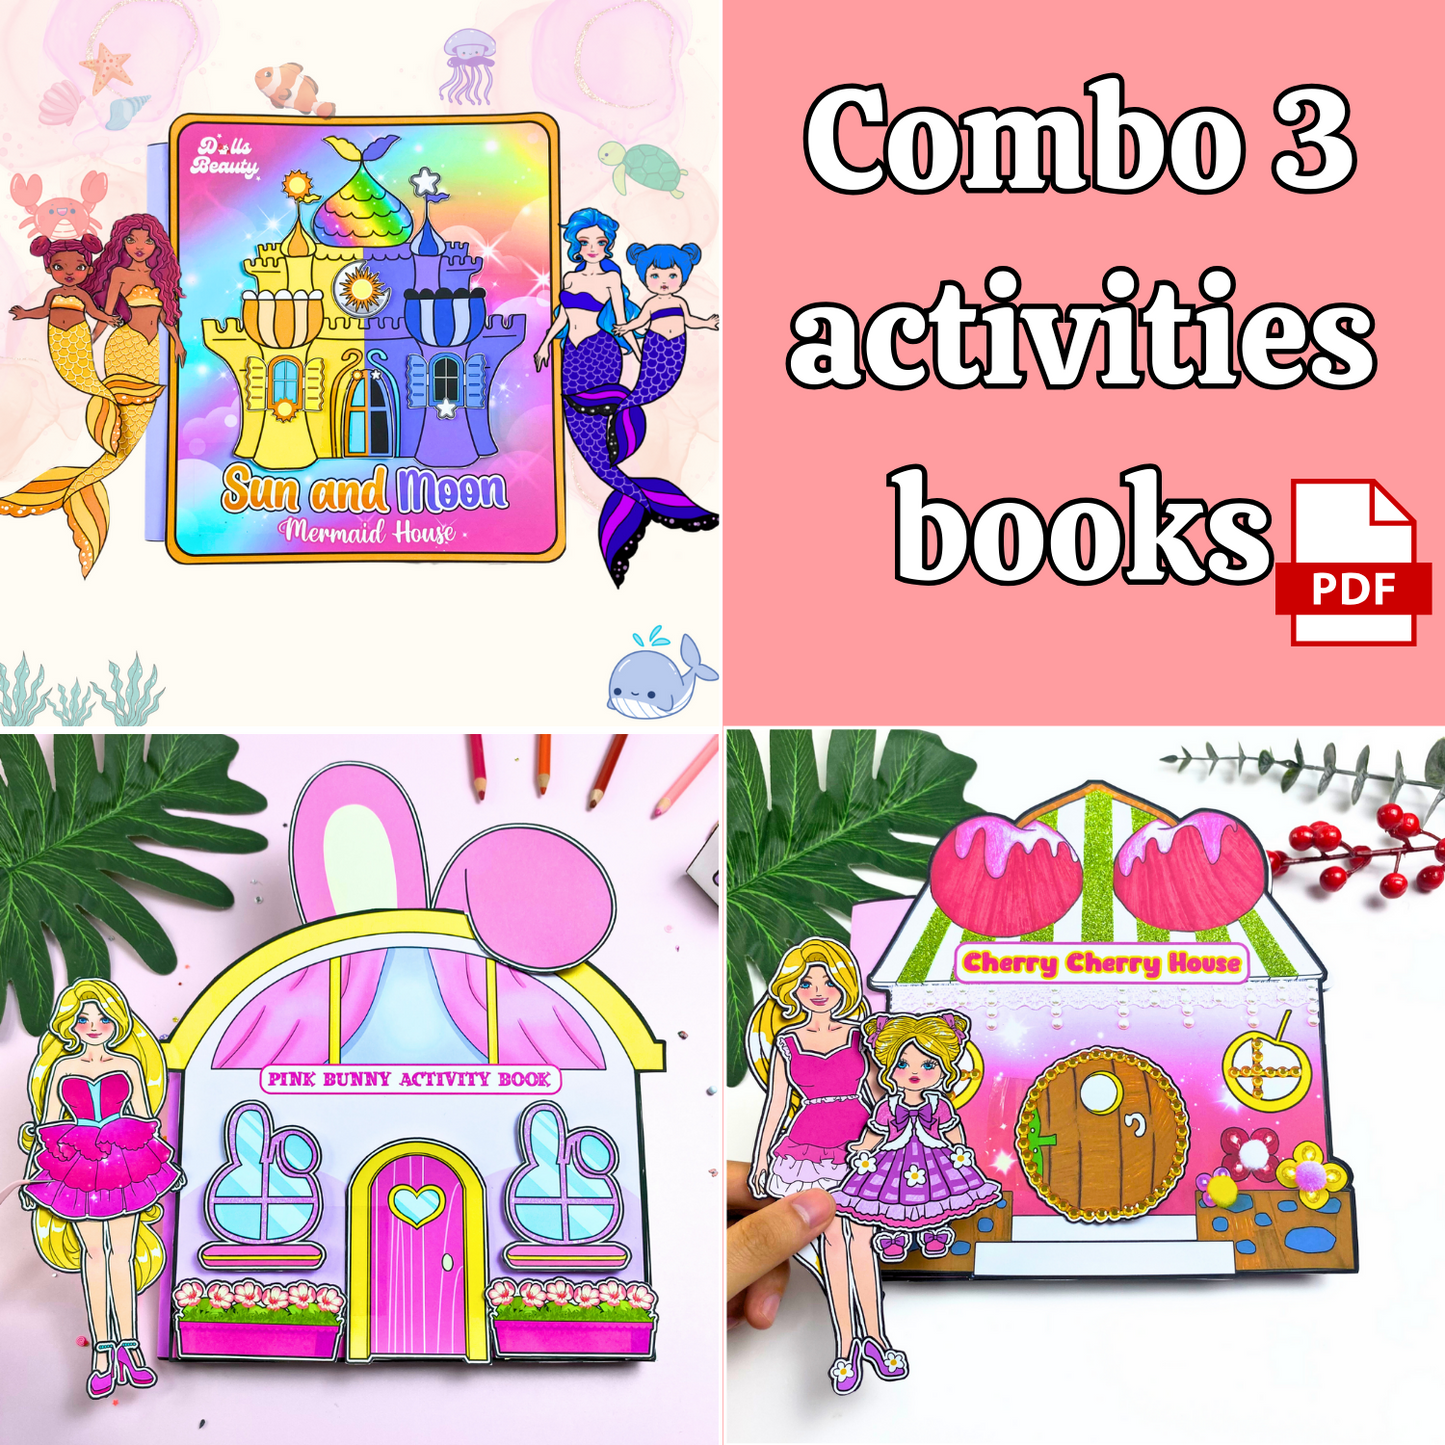 Education Activity Book | Sun and Moon Mermaid House Activity Book, Paper Doll House,Safe Paper Toy for Kids, Birthday Gift for Girls